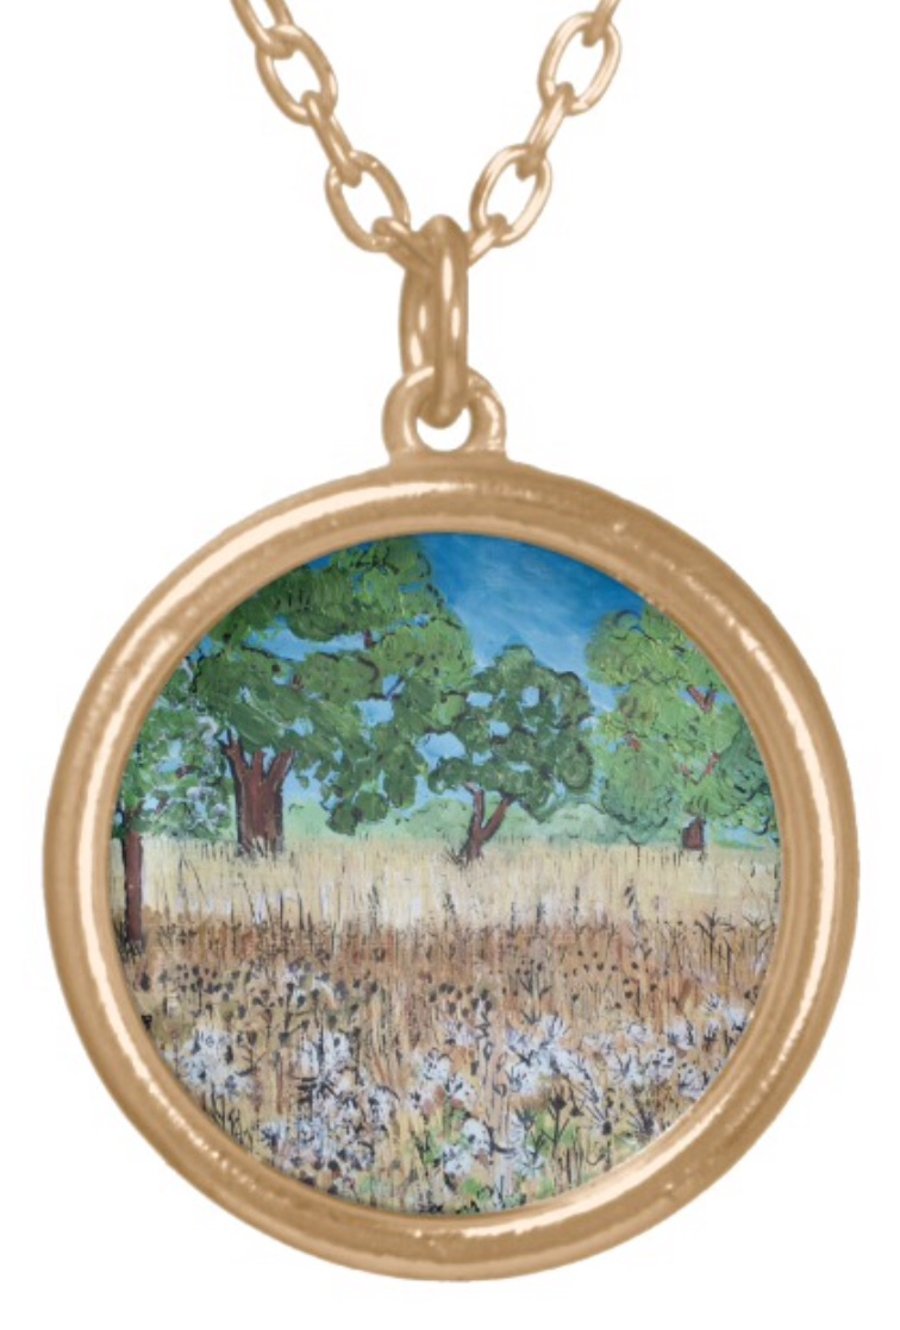 Beautiful Pendant featuring the design ‘To Everything There Is A Season’